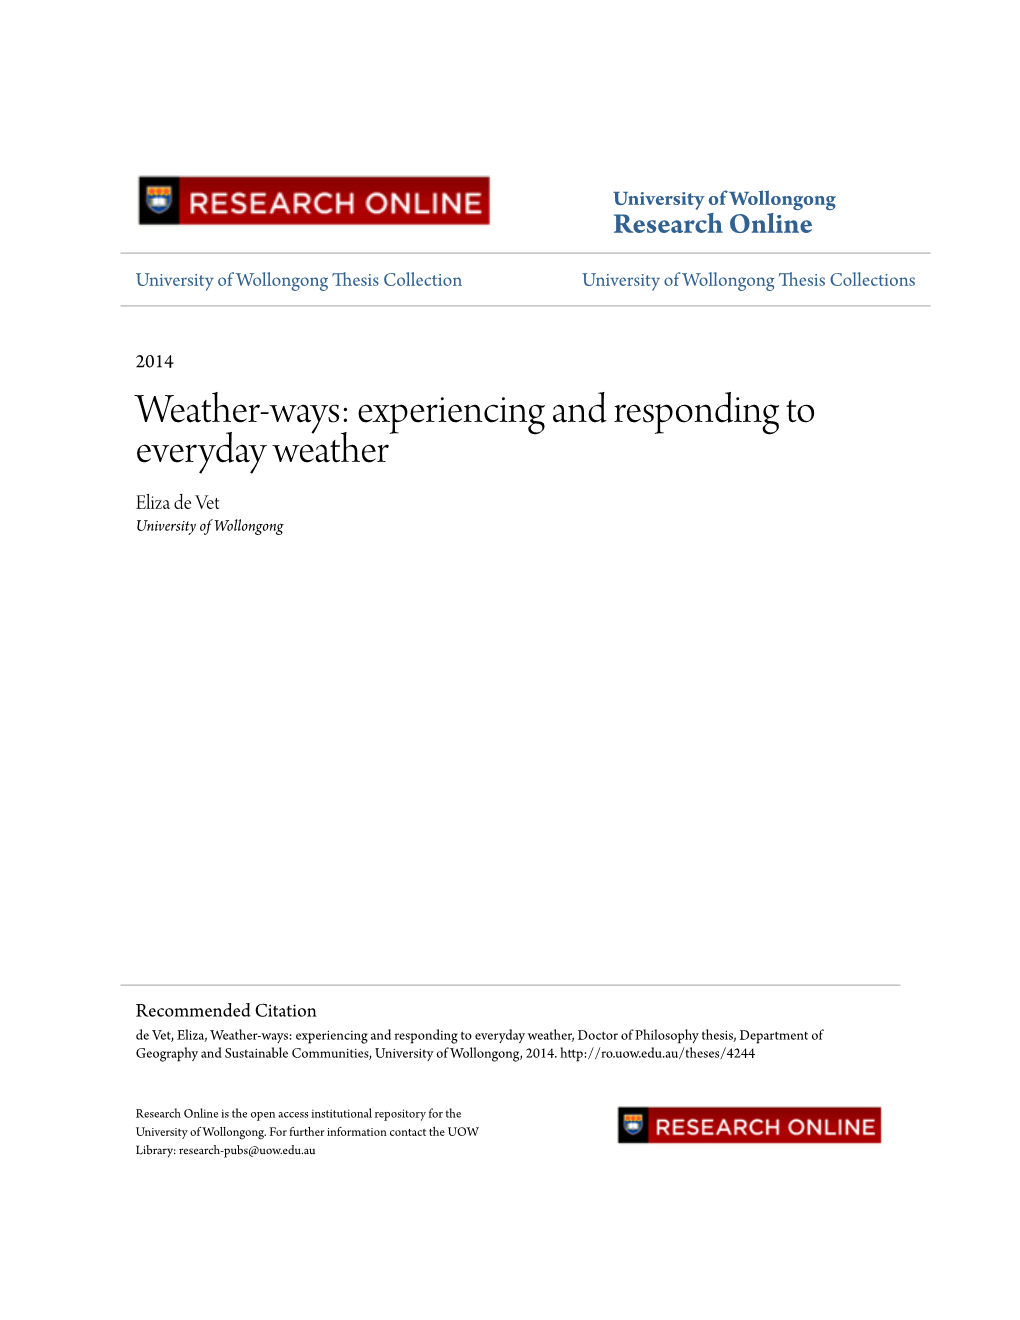 Weather-Ways: Experiencing and Responding to Everyday Weather Eliza De Vet University of Wollongong